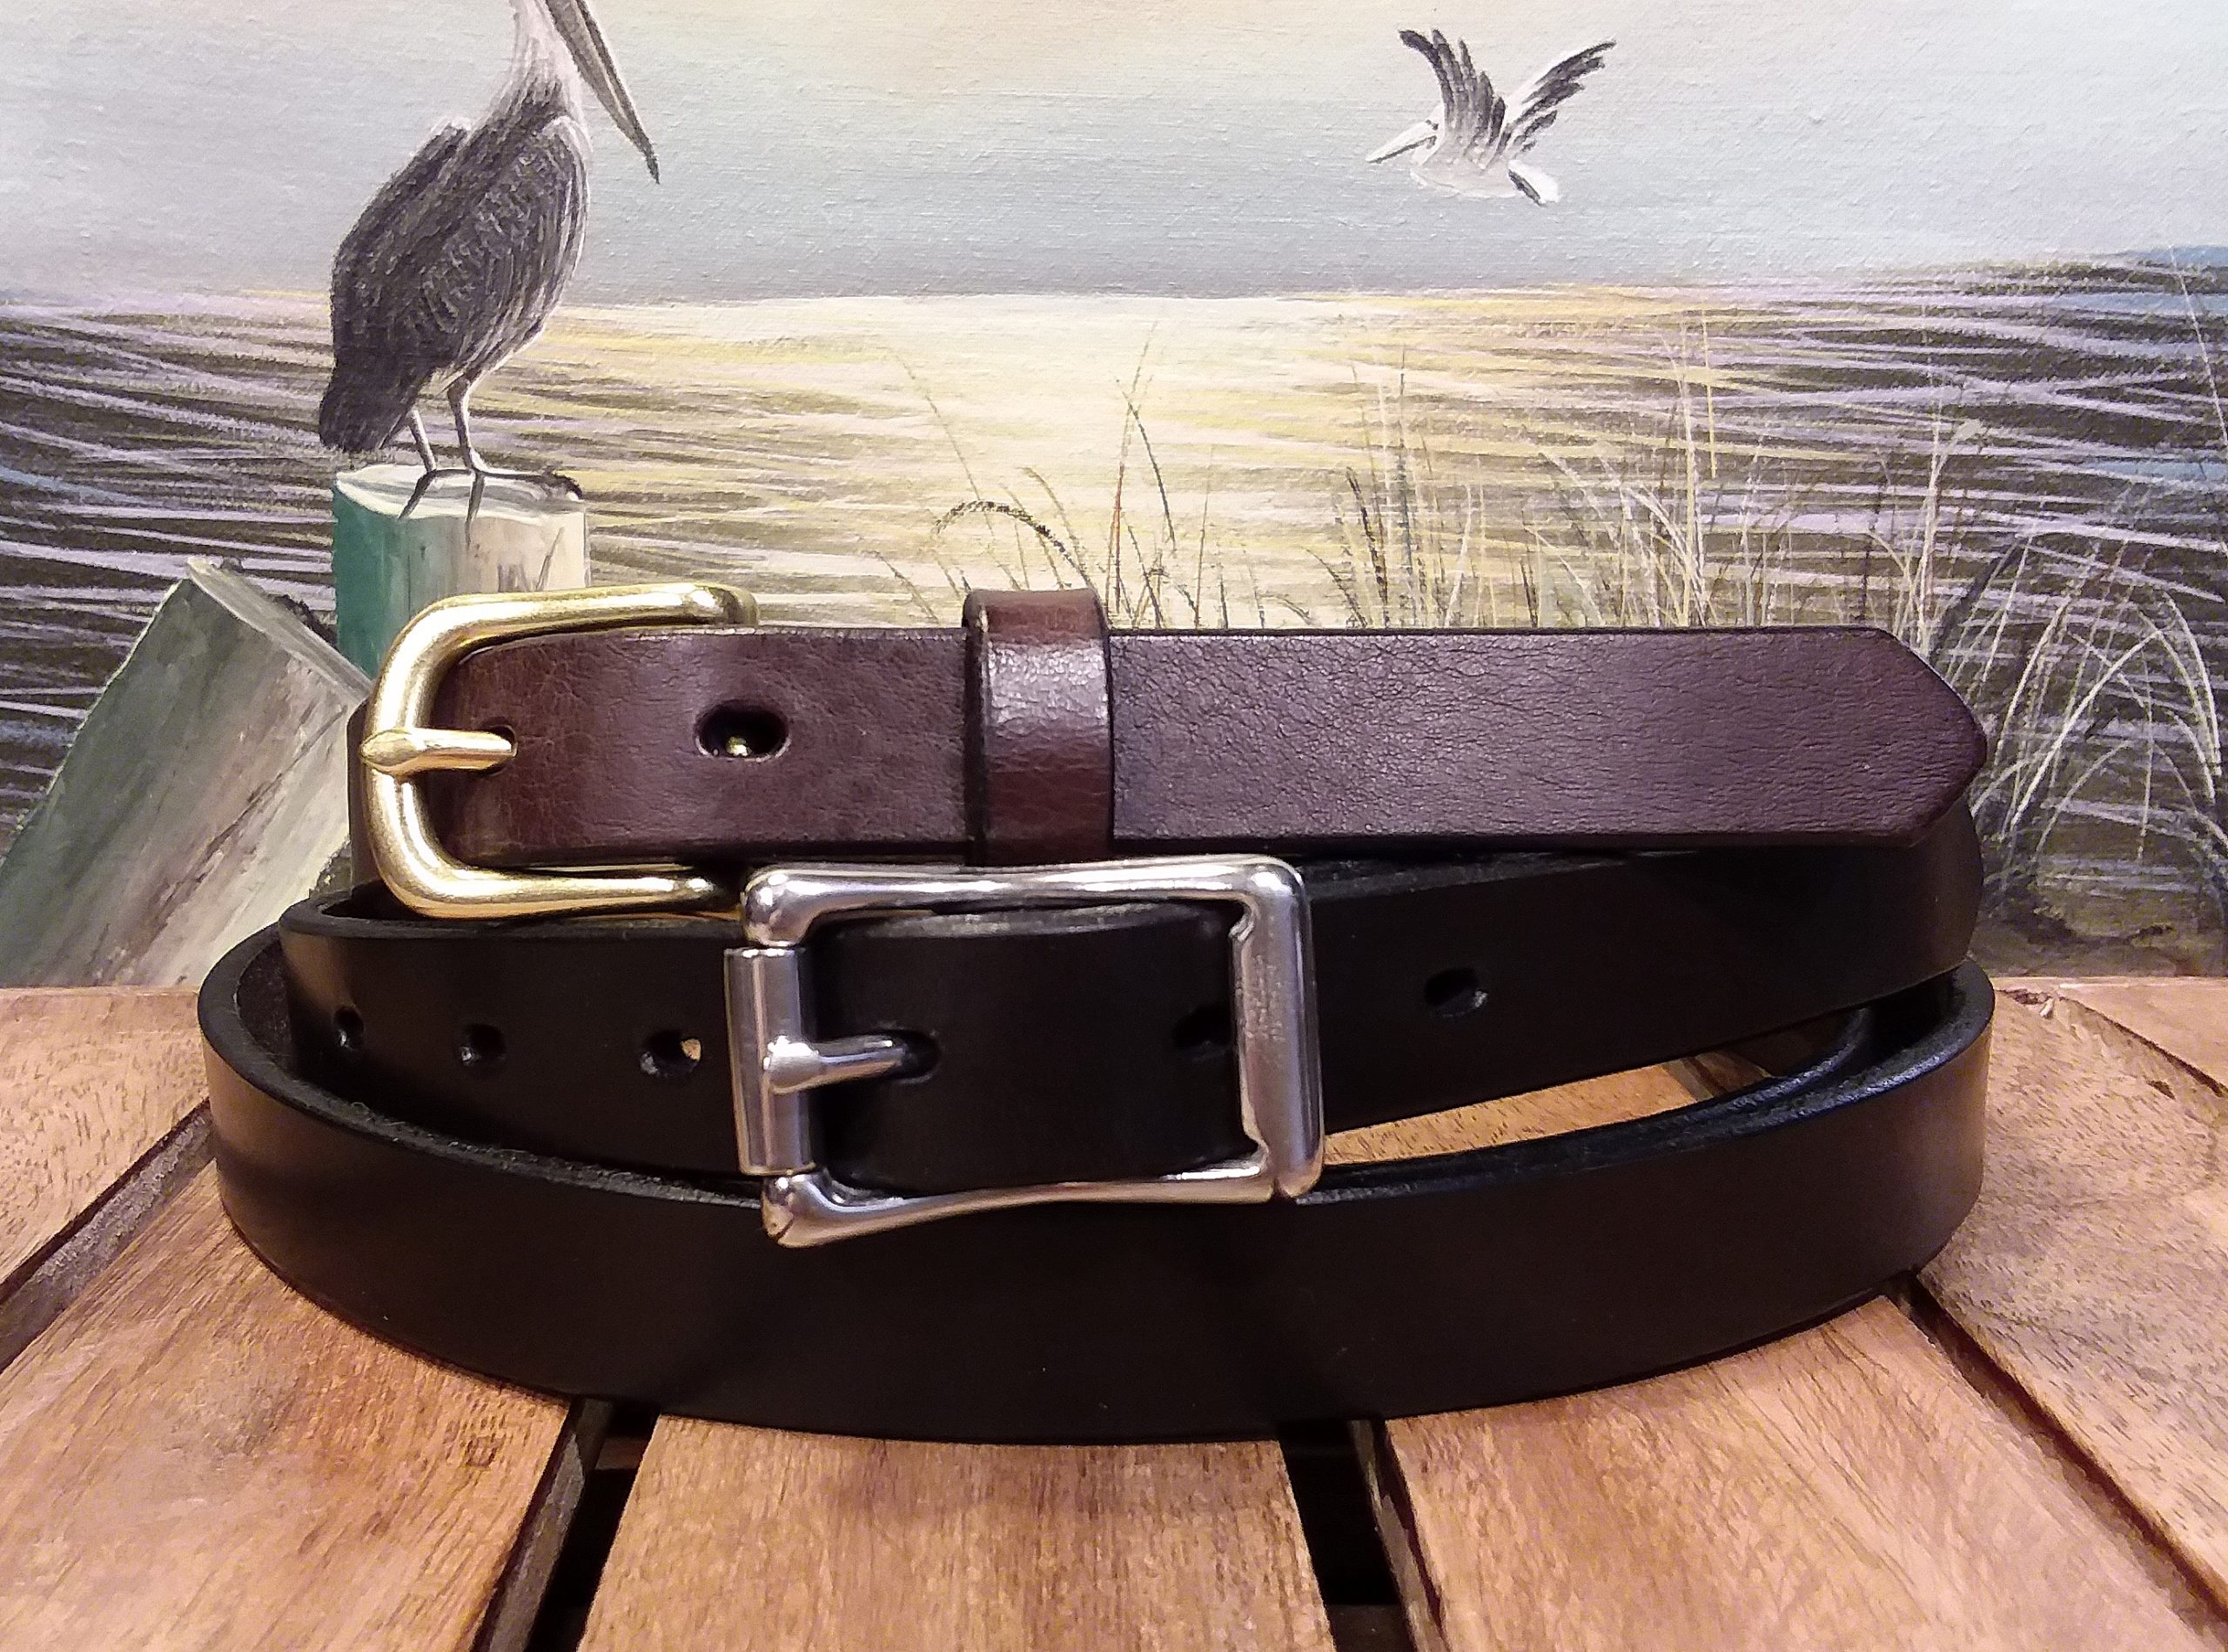 Buy Thin Leather Belt 1 inch